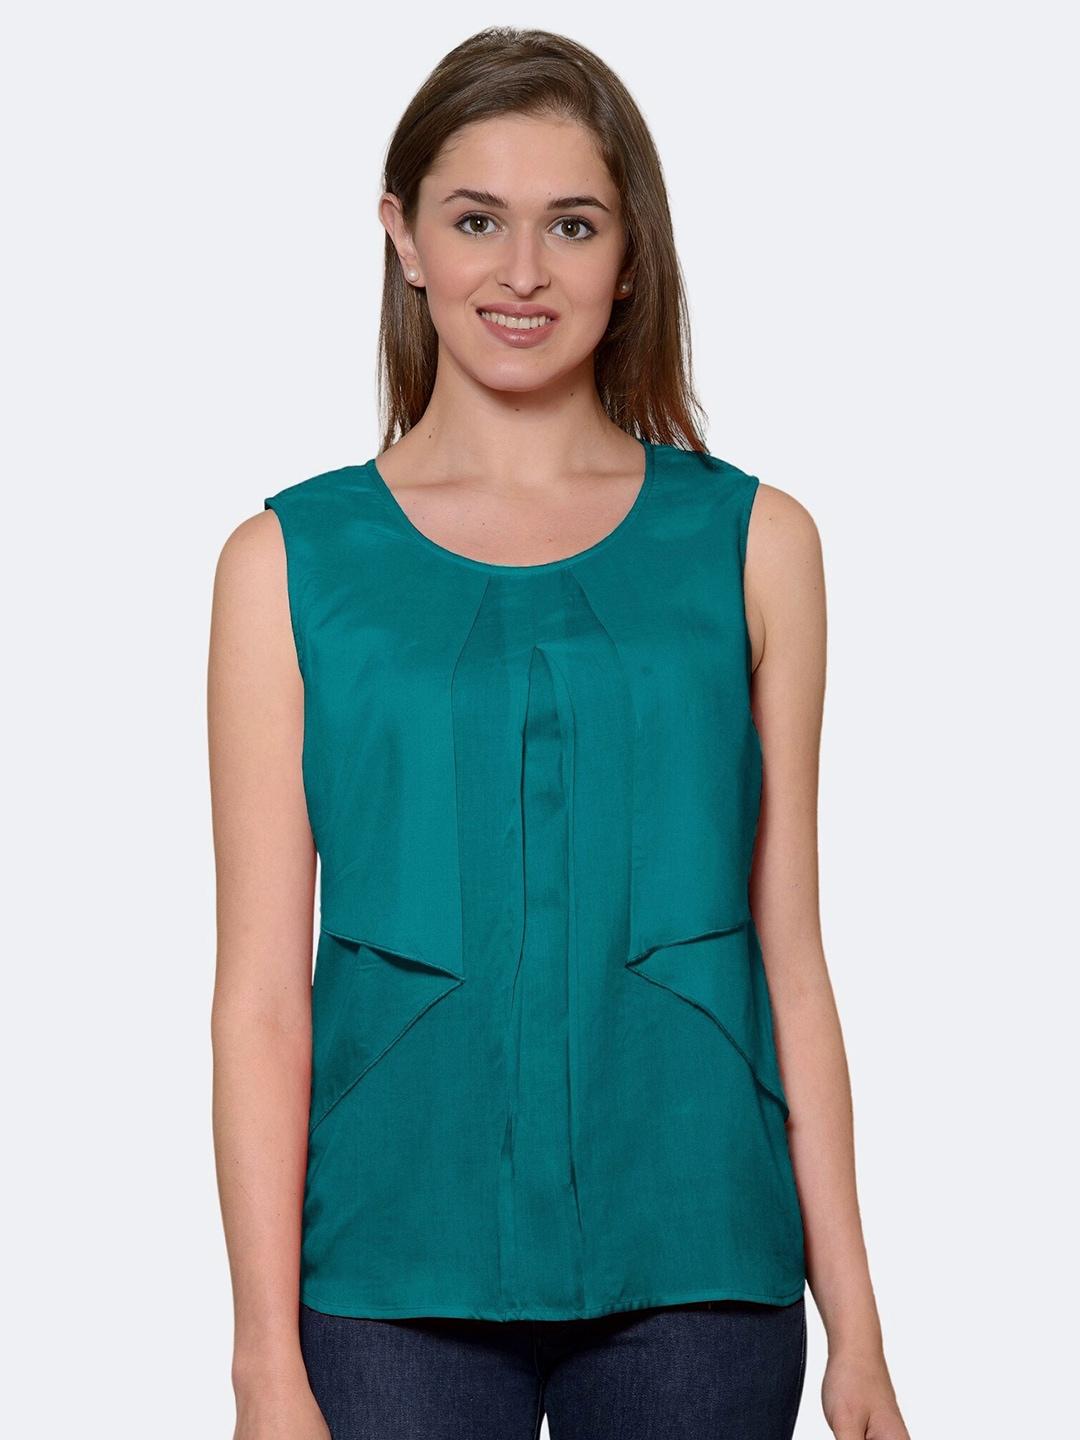 patrorna-women-green-solid-layered-top